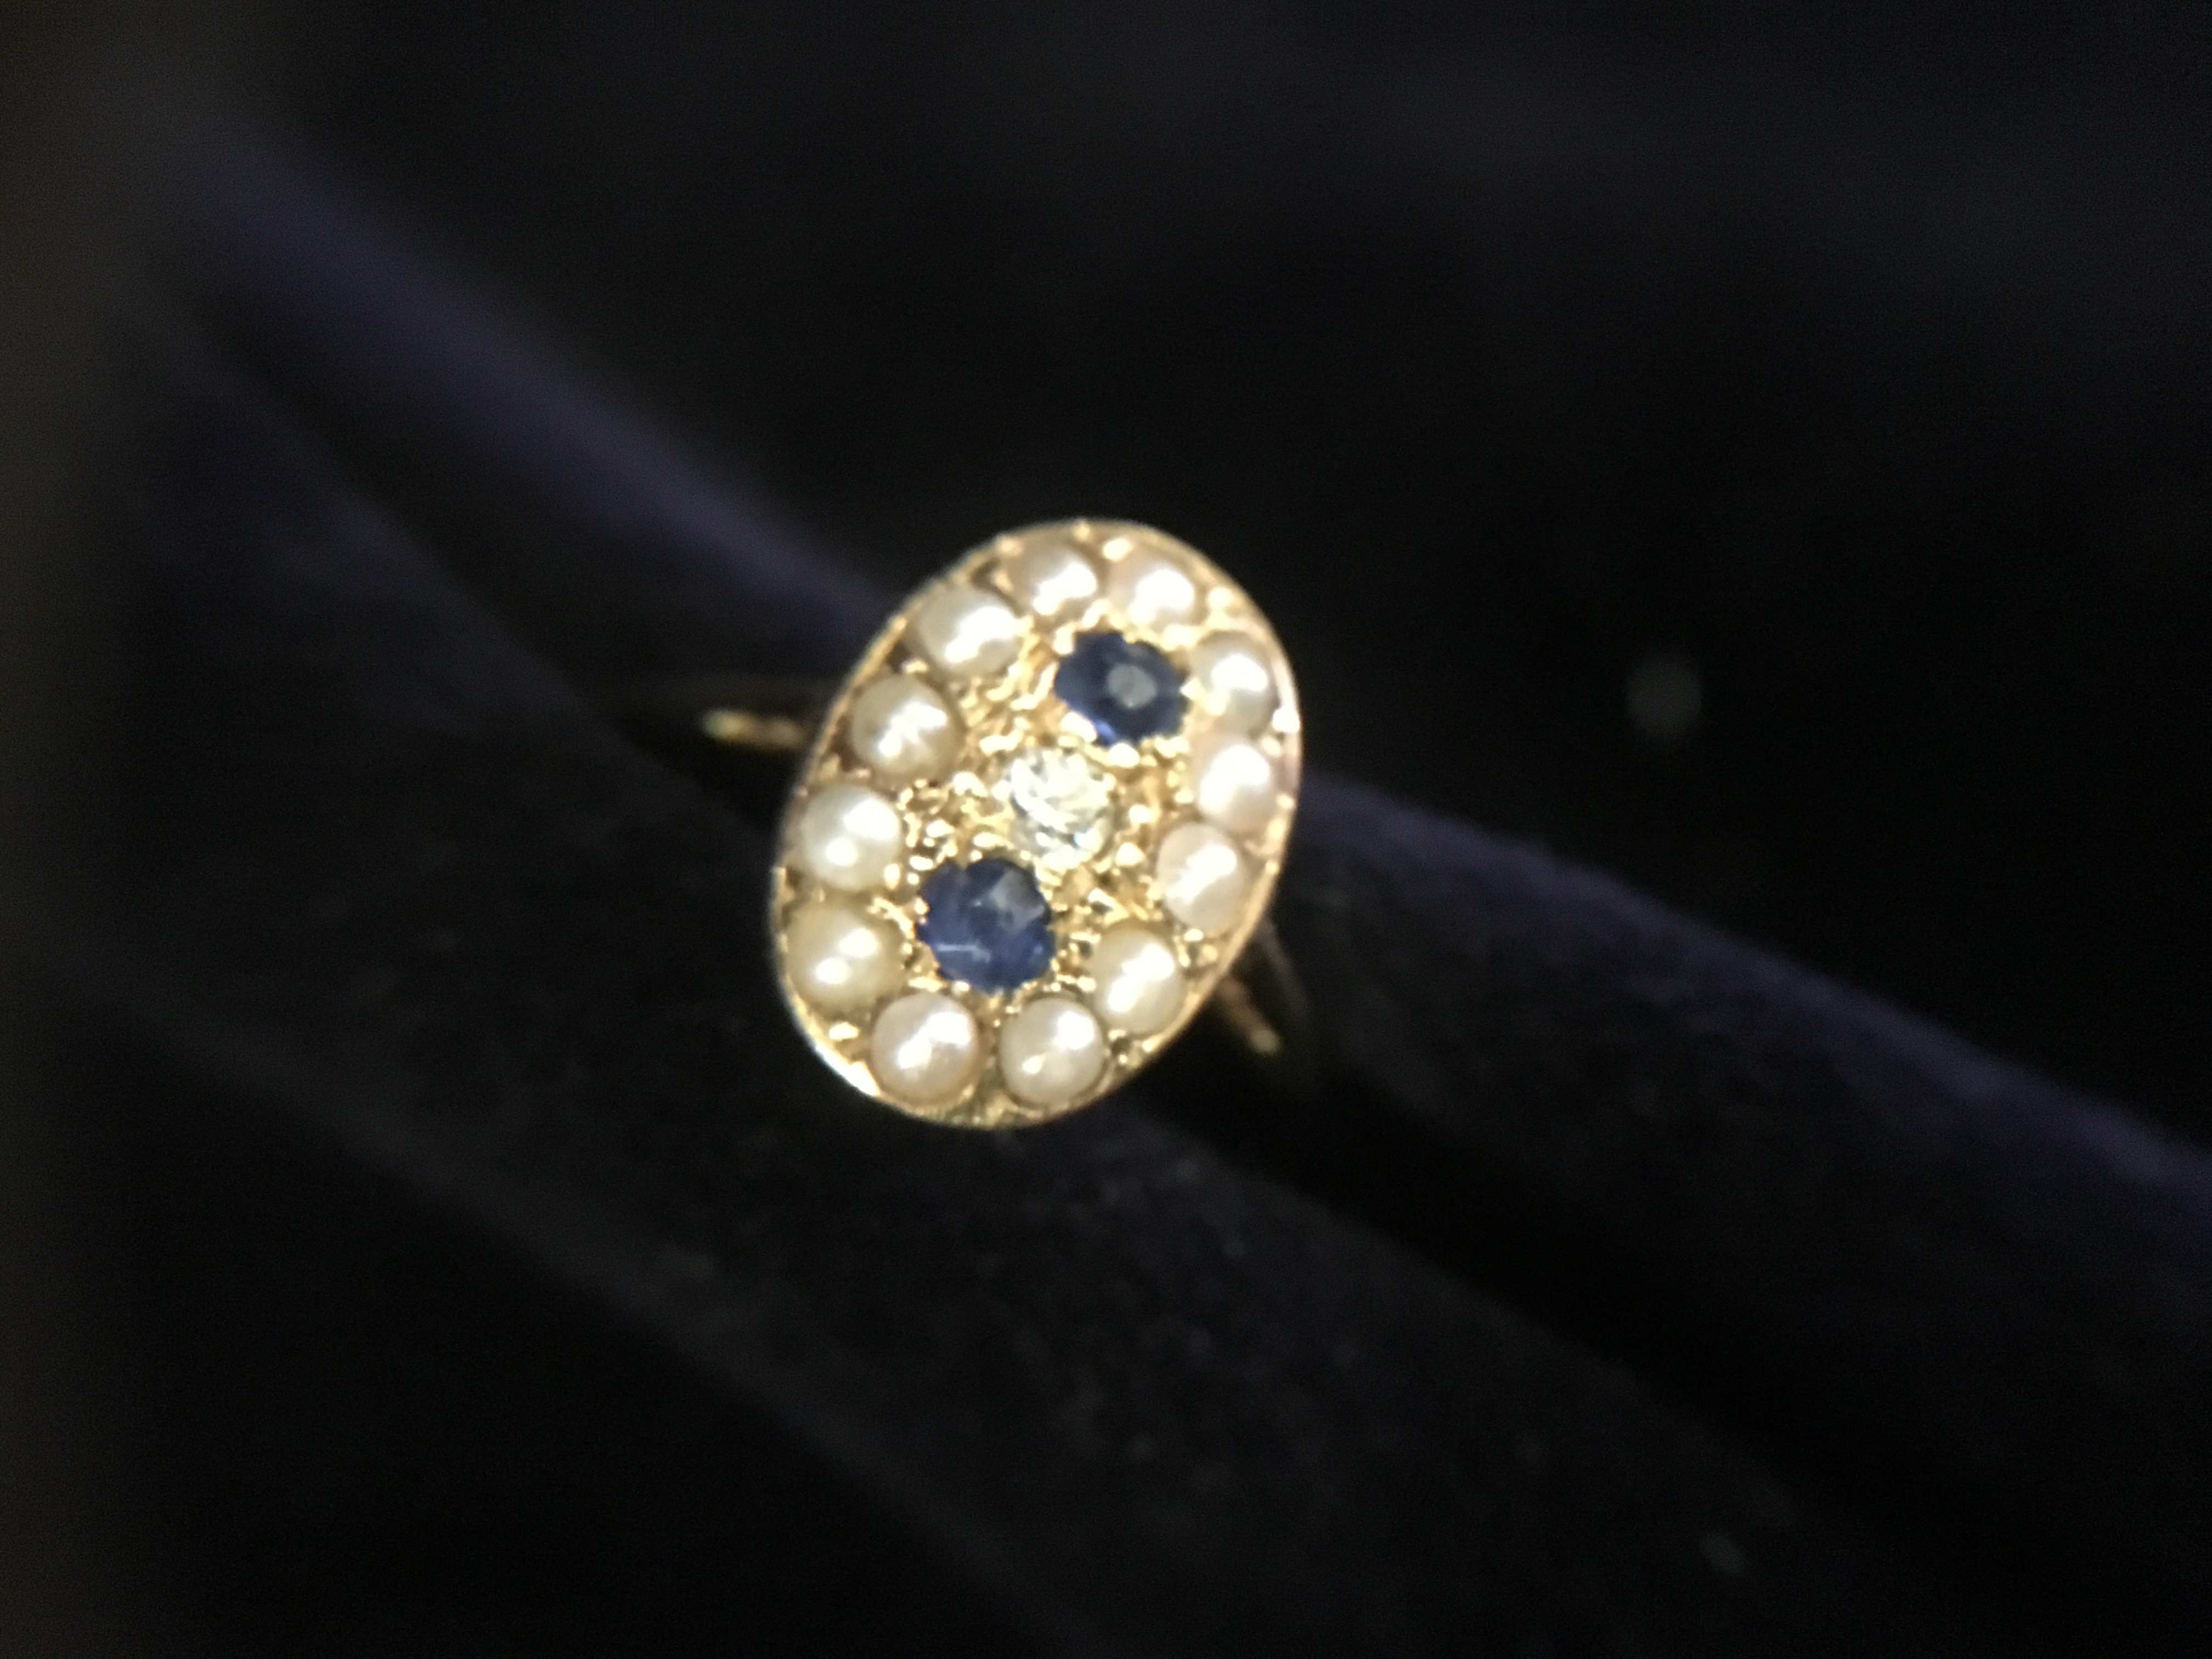 An sapphire and pearl vintage ring set in an 18ct gold mount.